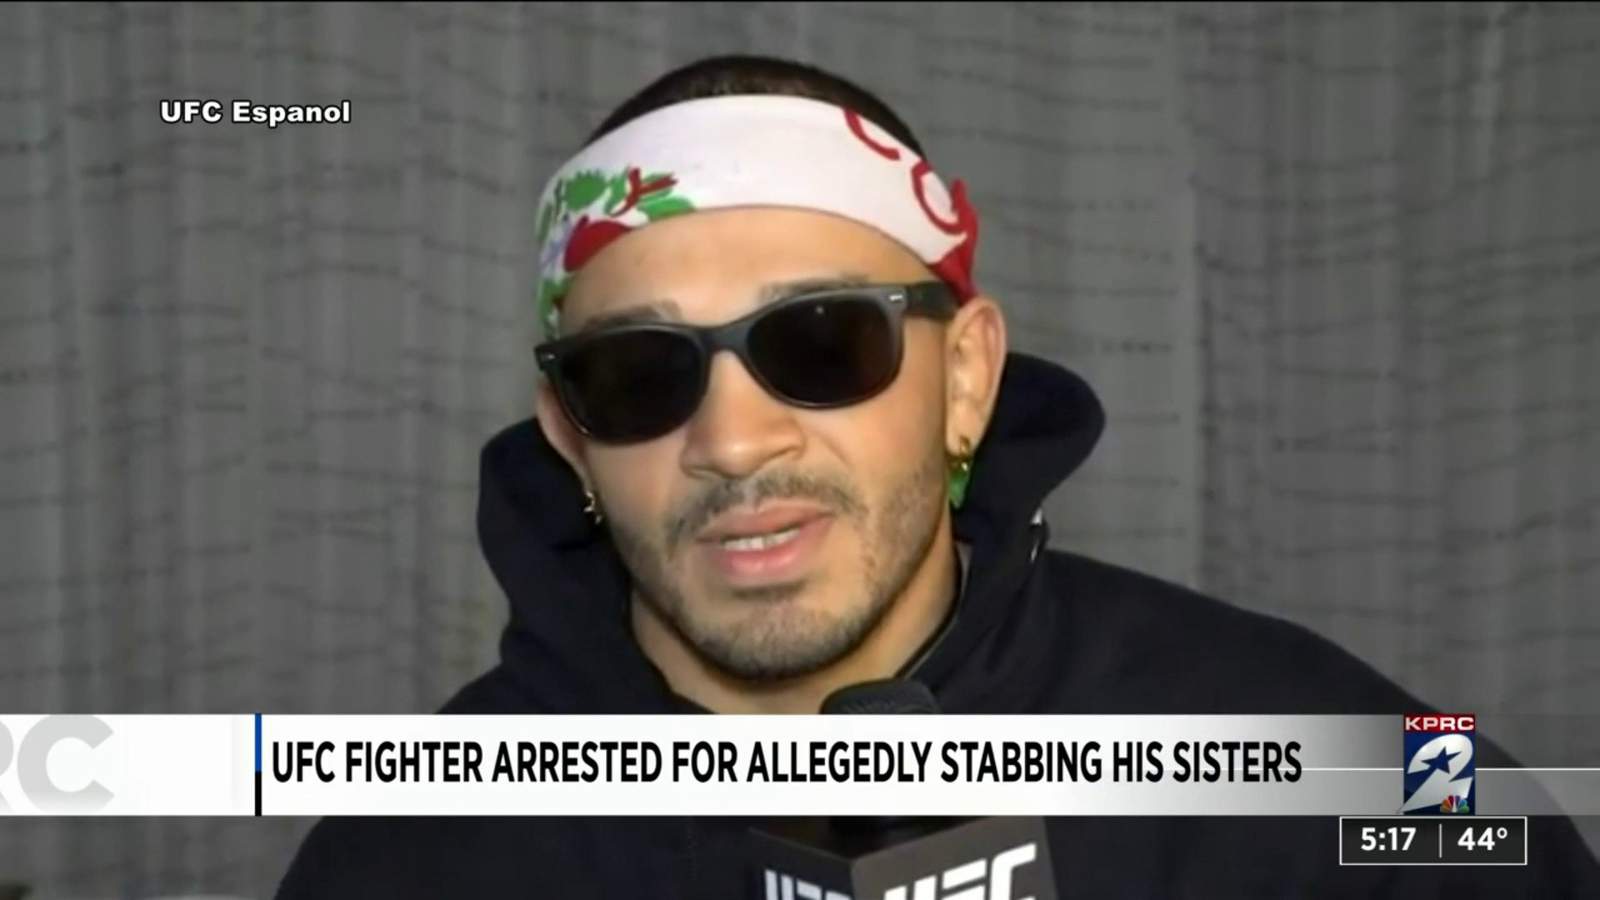 ‘Higher power’ compelled UFC fighter Irwin Rivera to stab his sisters, police say